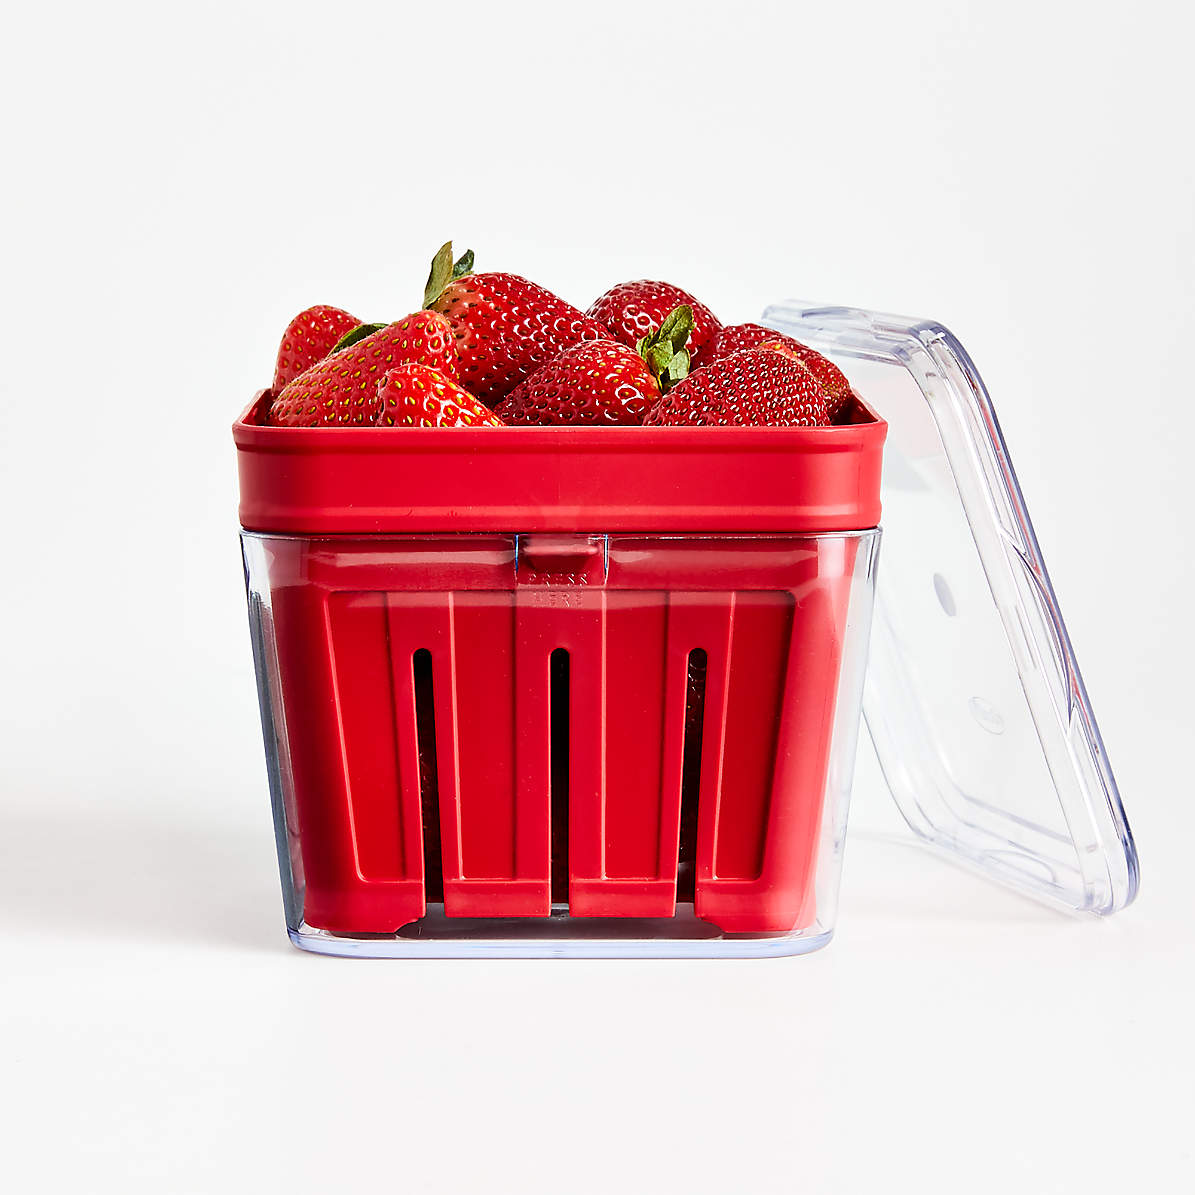 Chef'n Reusable Berry Basket, Set of 2, Holds 1 Pint, BPA-Free Plastic on  Food52